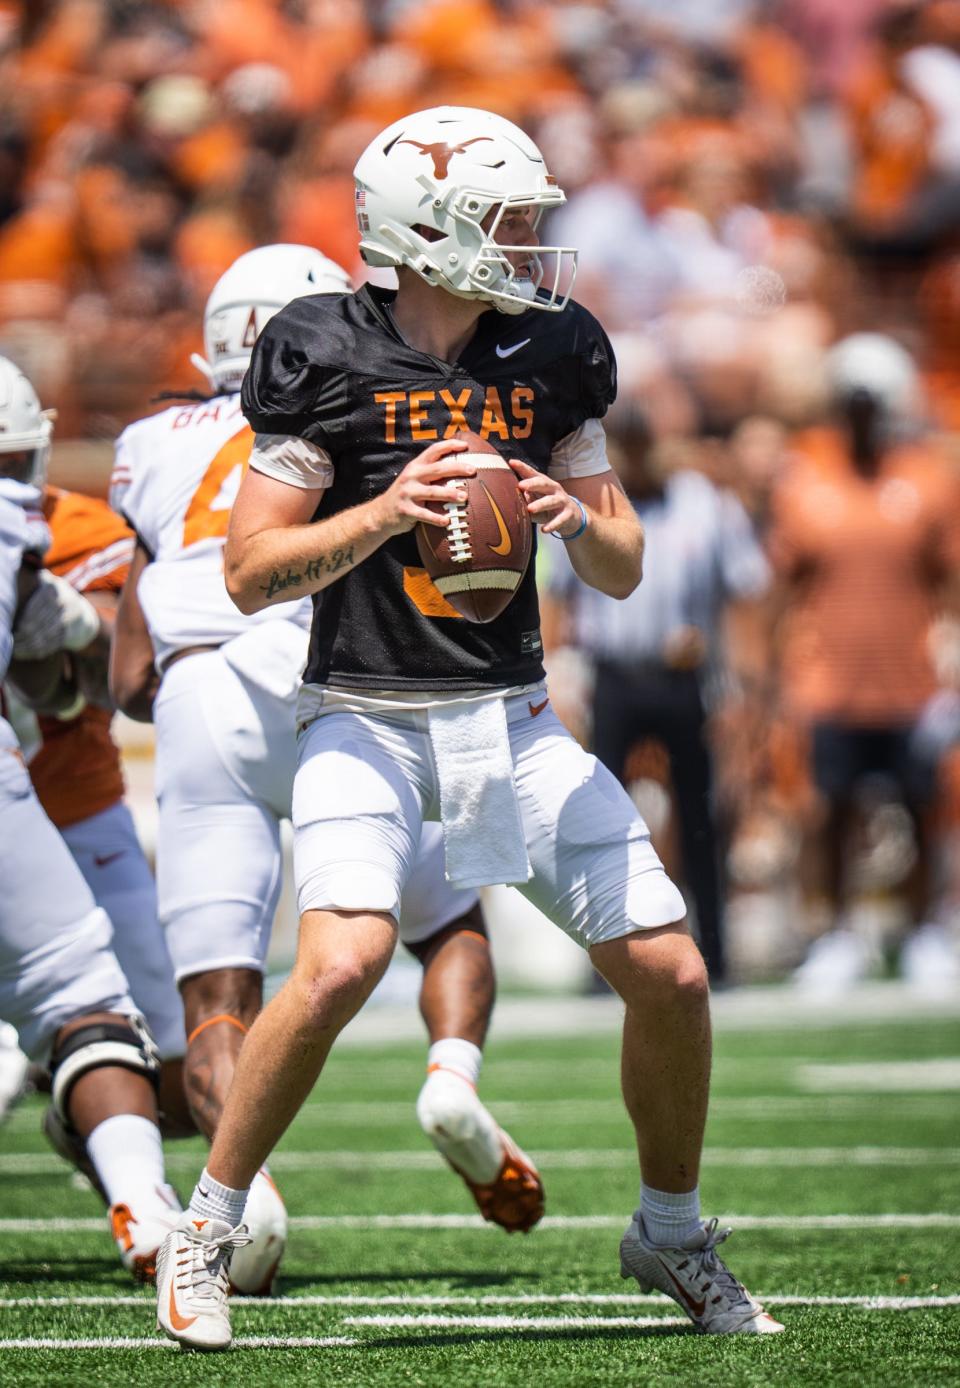 Texas quarterback Quinn Ewers is projected as a top-10 pick in next spring's NFL draft. Head coach Steve Sarkisian said at Wednesday's Big 12 Media Days that Ewers has earned the respect of his teammates.